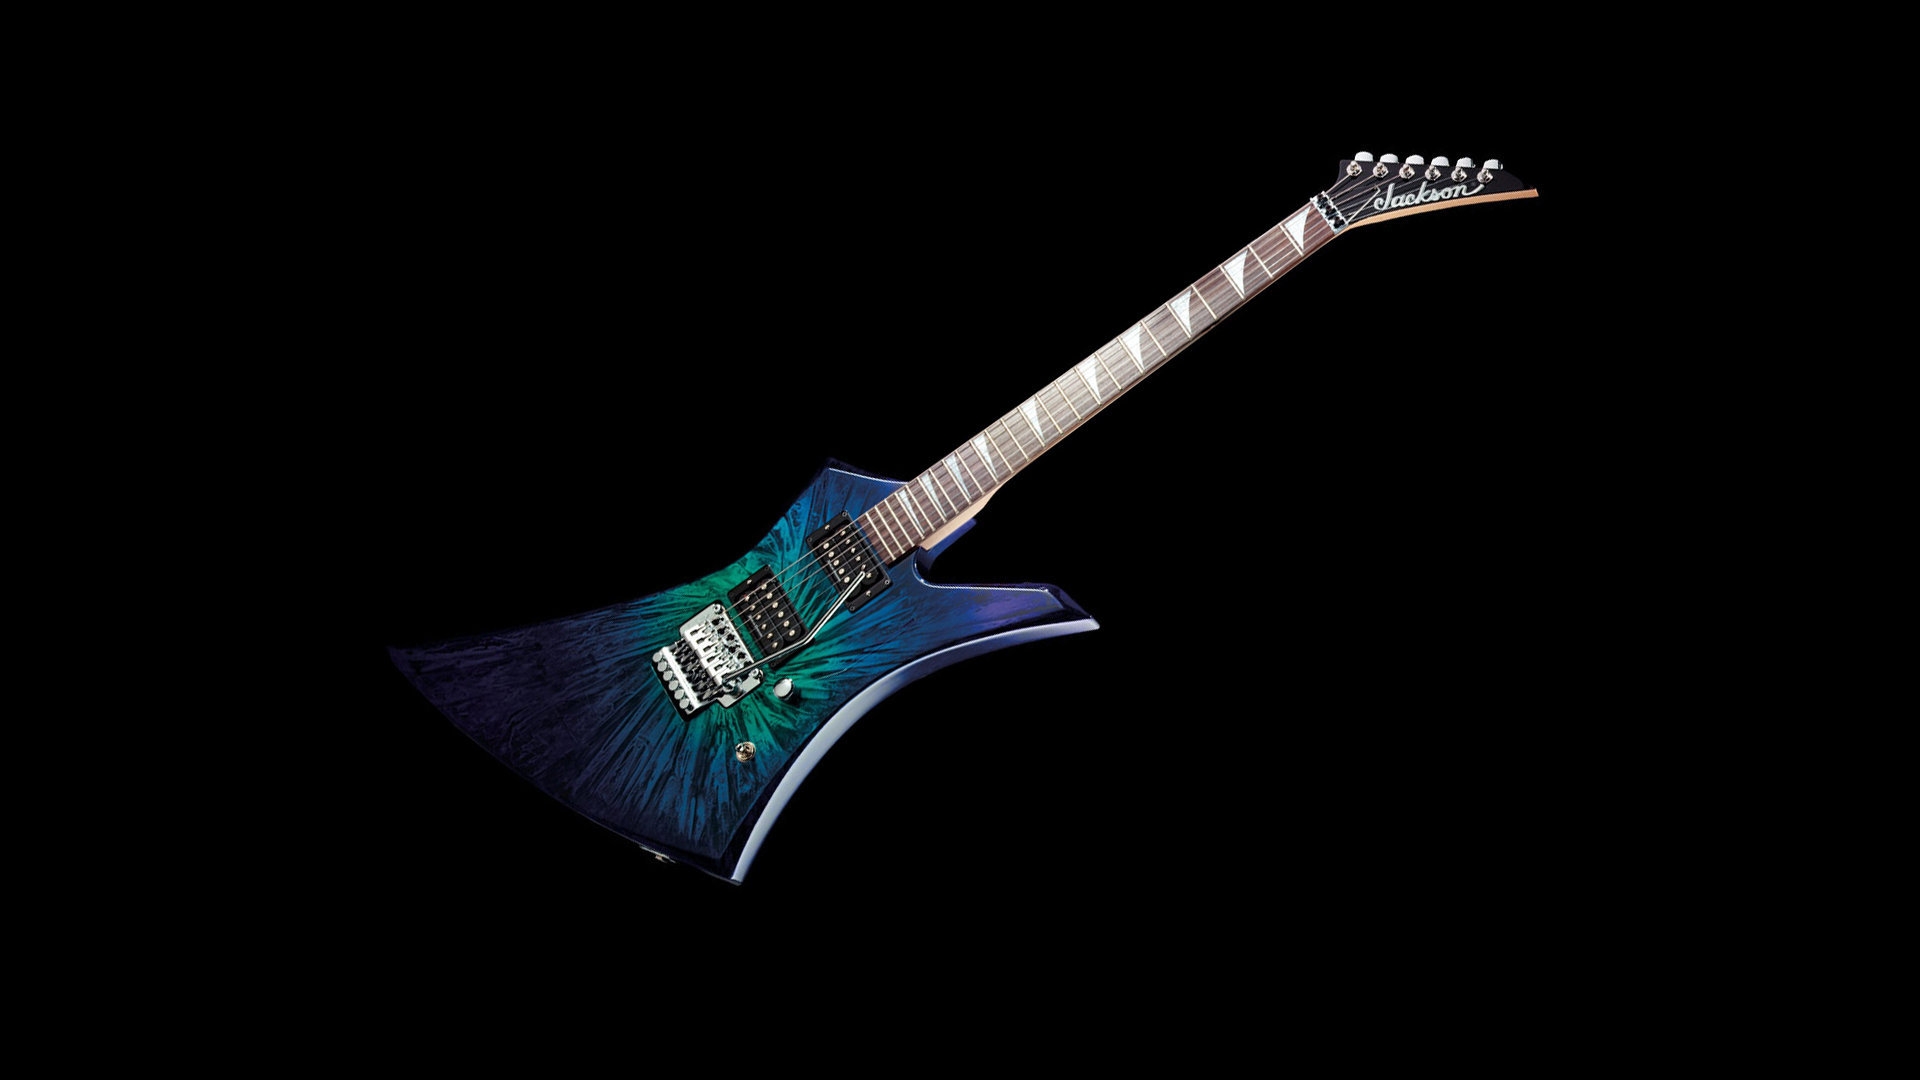 Colourful Guitar for 1920 x 1080 HDTV 1080p resolution